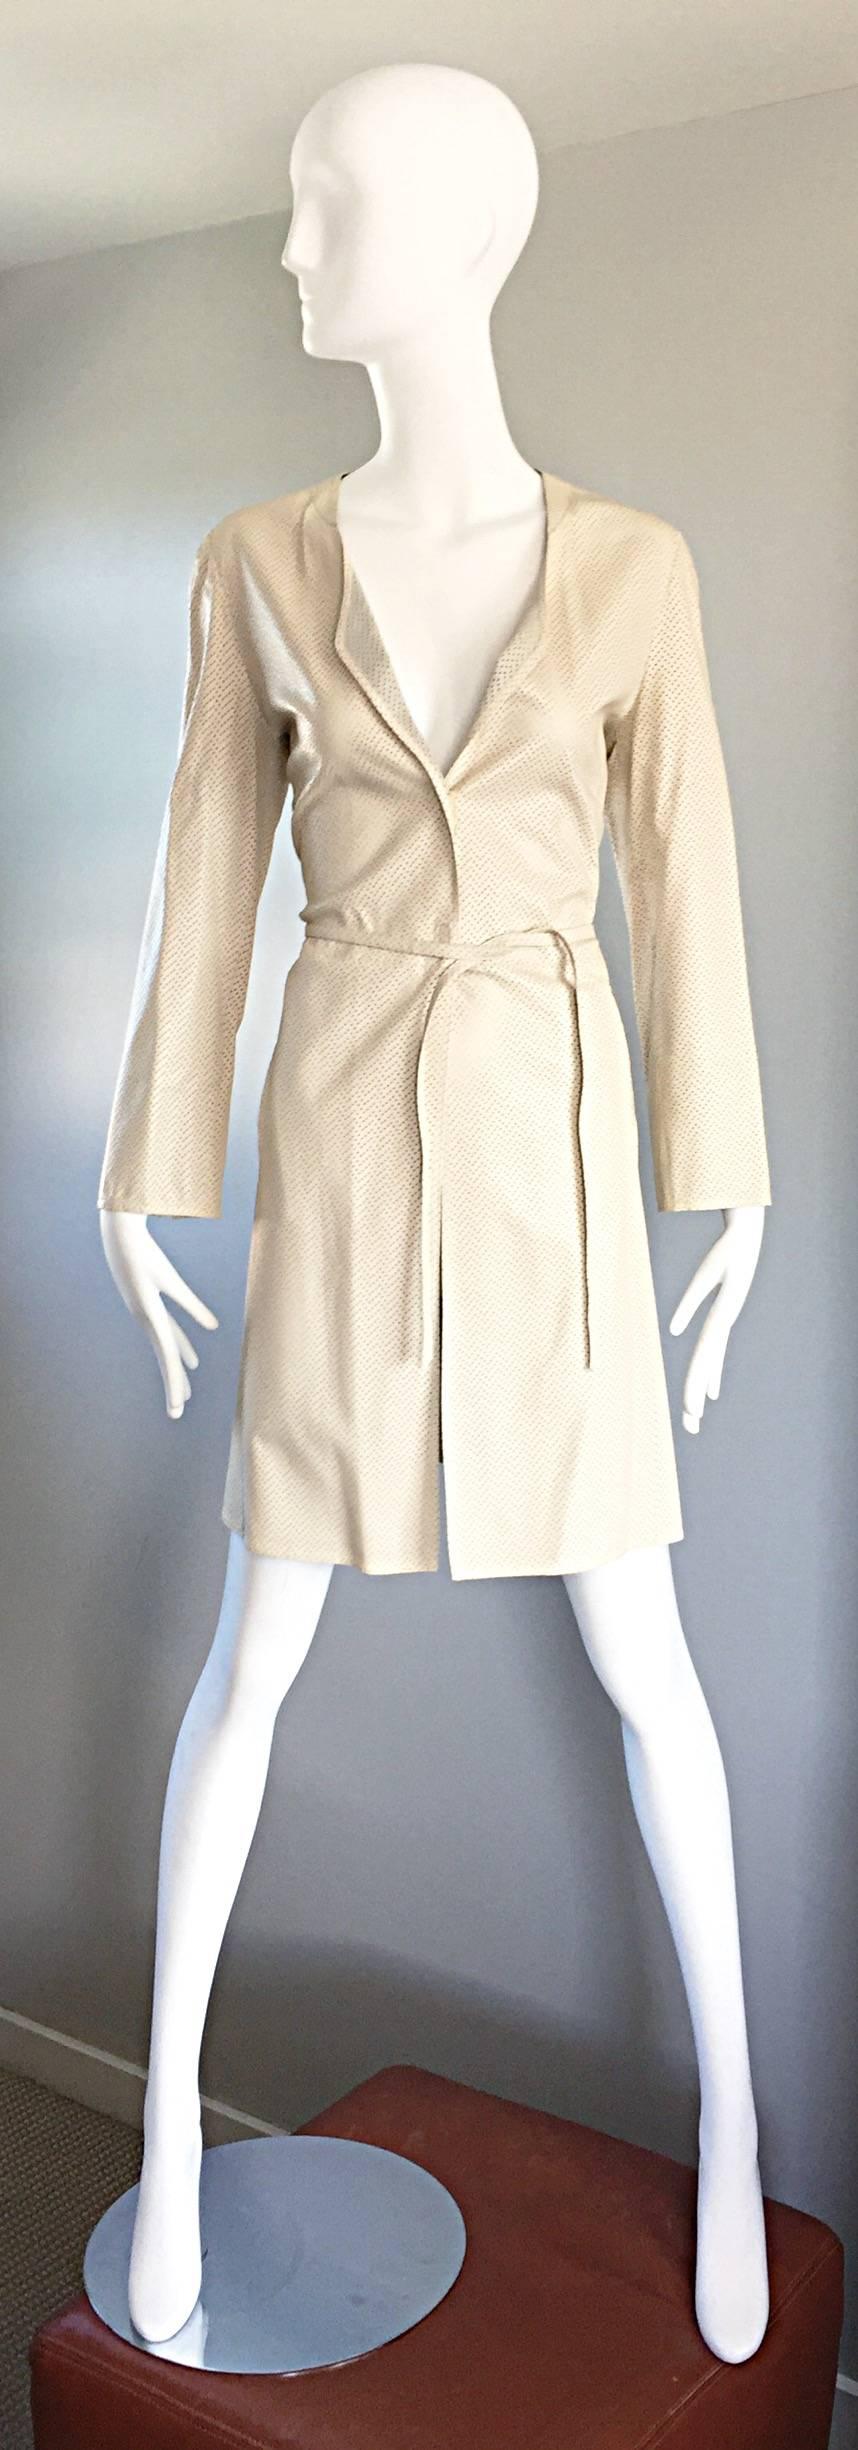 Chic vintage GIROGIO ARMANI 1990s fitted Ivory / beige leather perforated belted trench jacket coat! Features extremely soft Napa leather that is perforated allover. Unique hidden heavy duty plastic snaps to close the jacket. Matching detachable